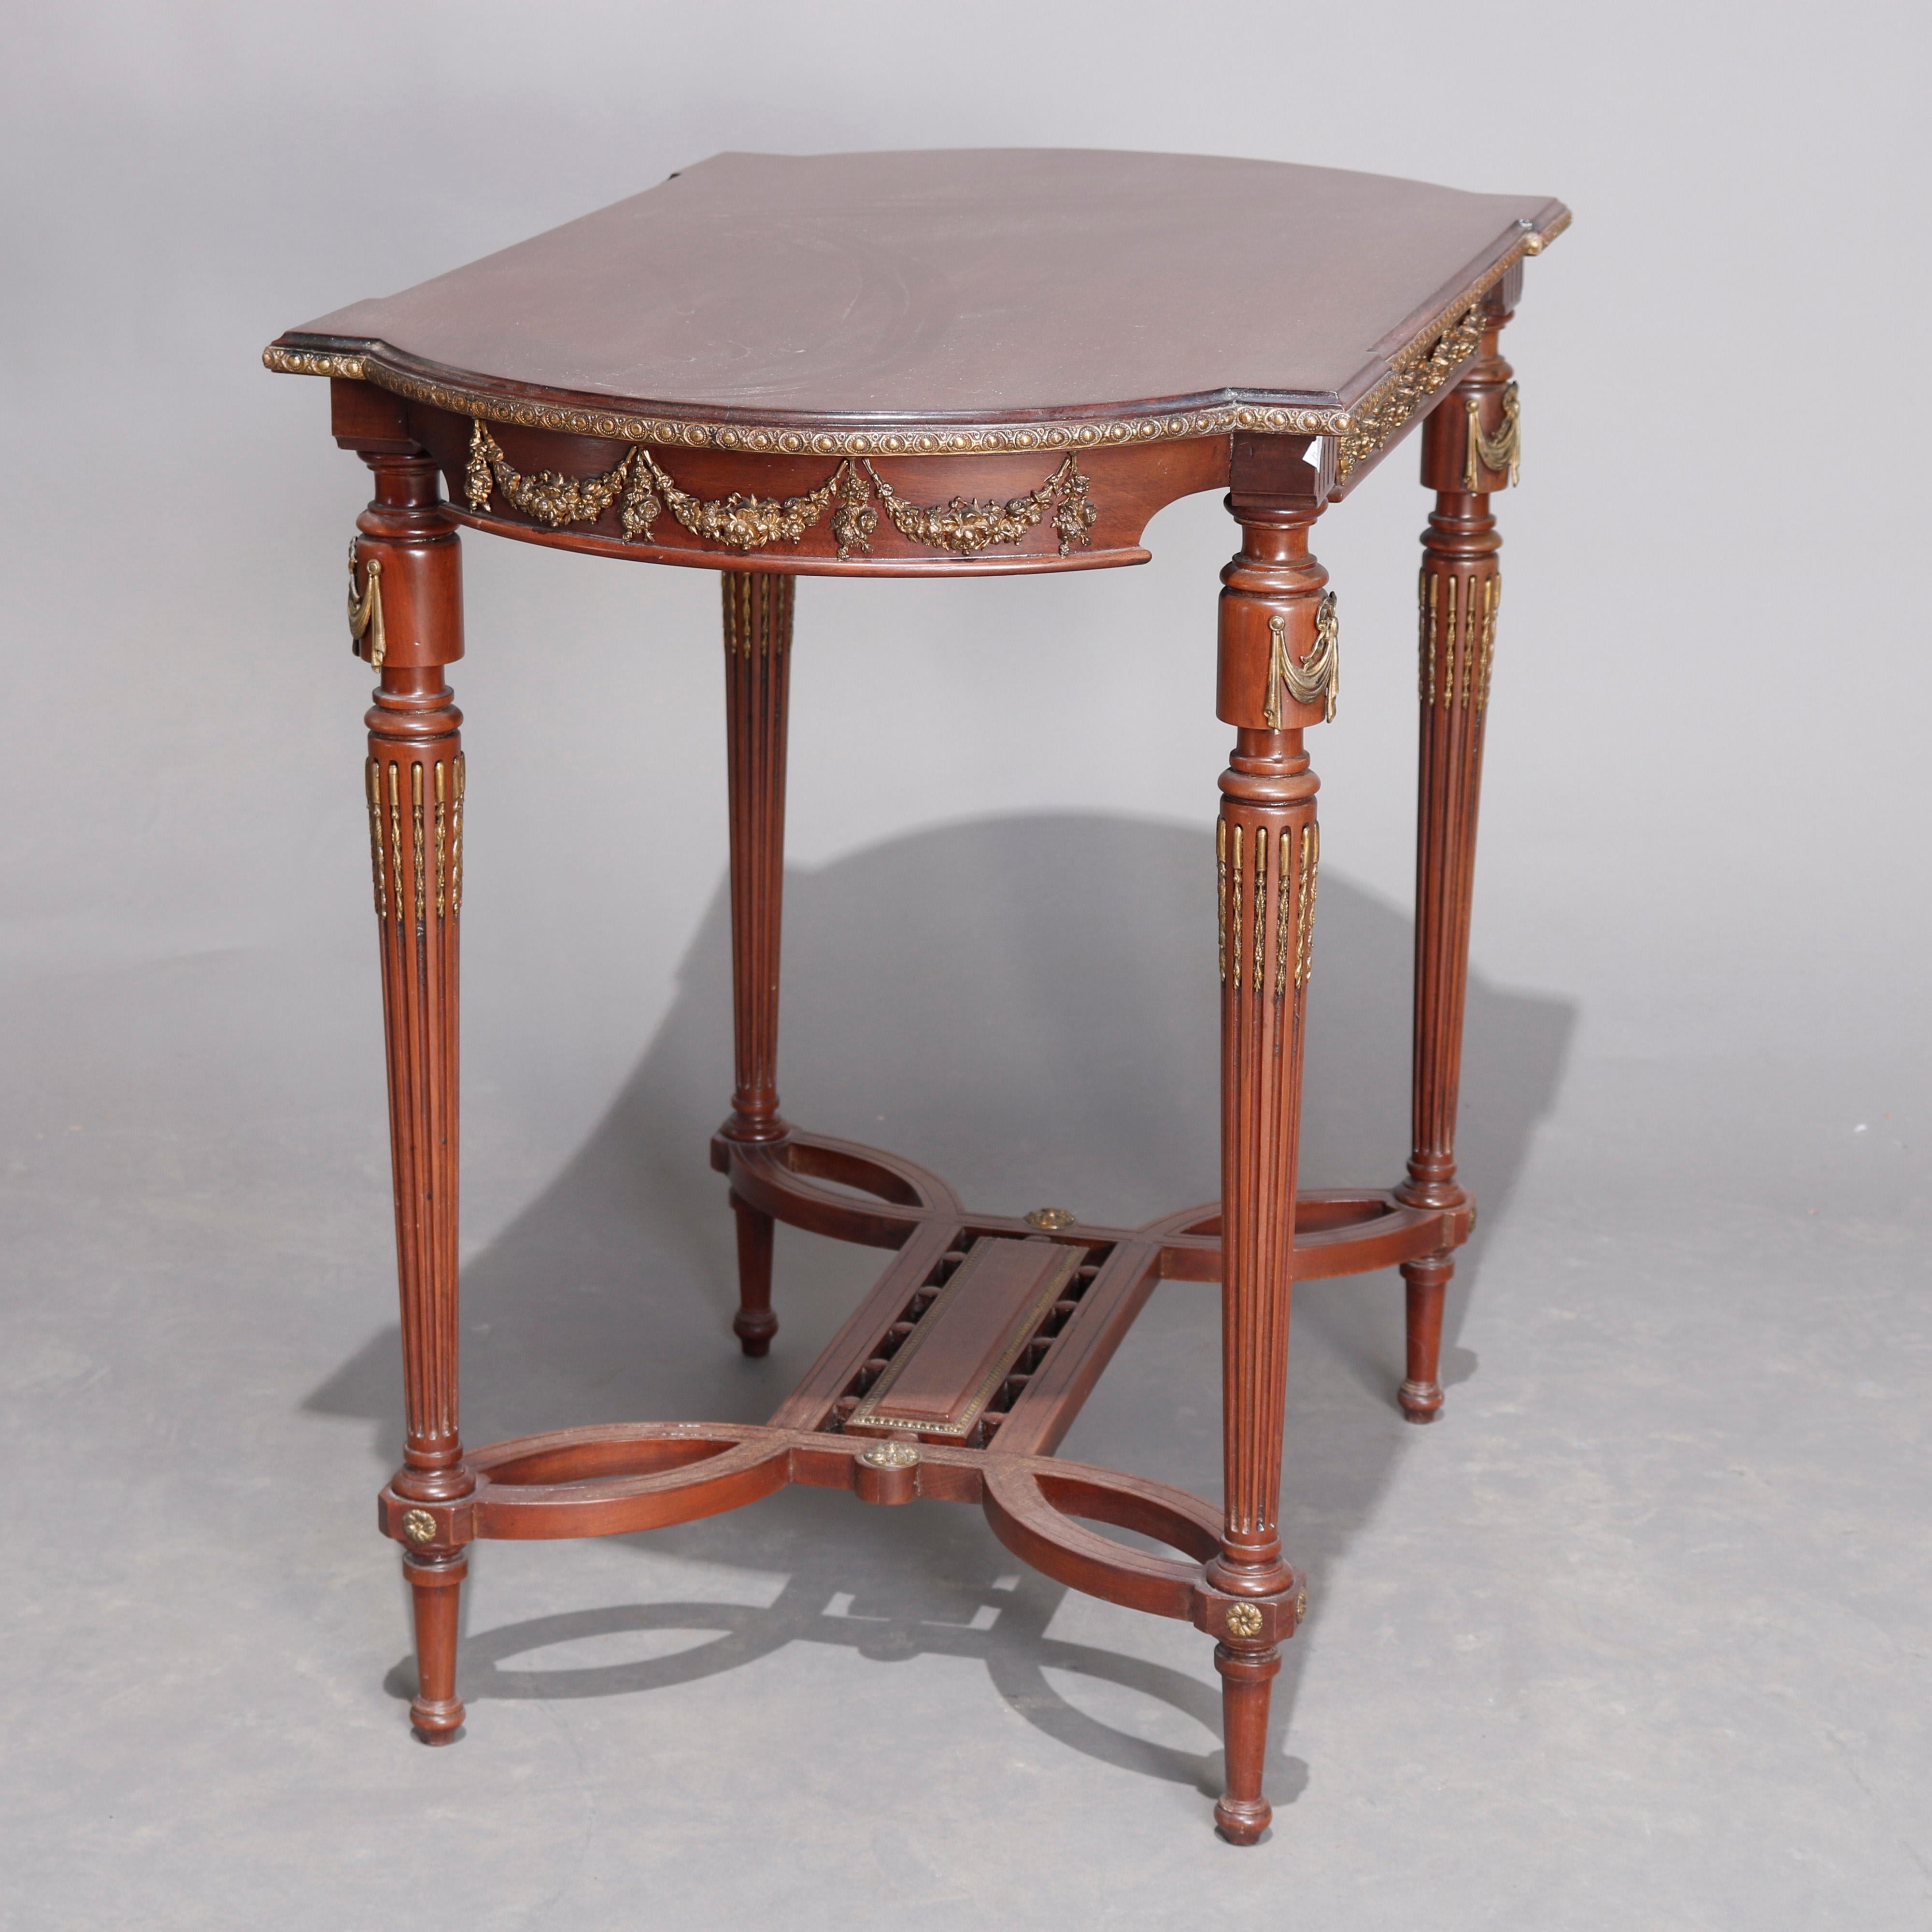 20th Century Antique French Louis XVI Mahogany Side Table with Ormolu Mounts, circa 1900